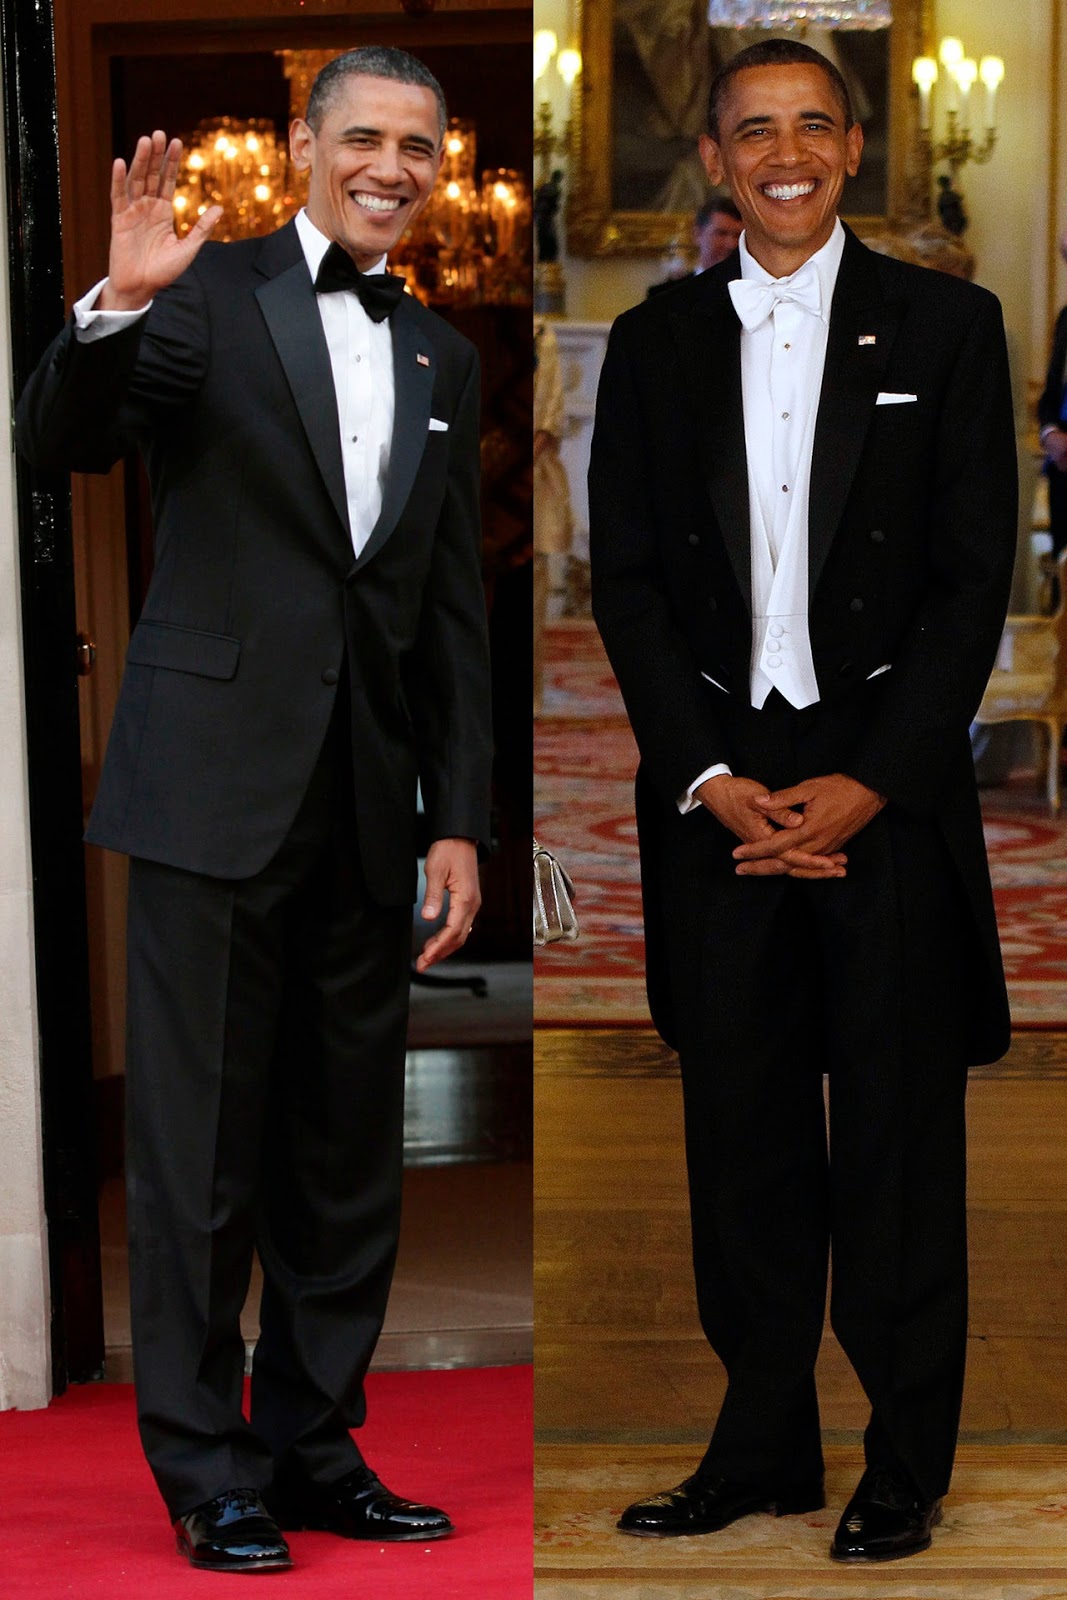 Belgian Dandy: Black versus White tie: What's the difference ? Why, and  what ?